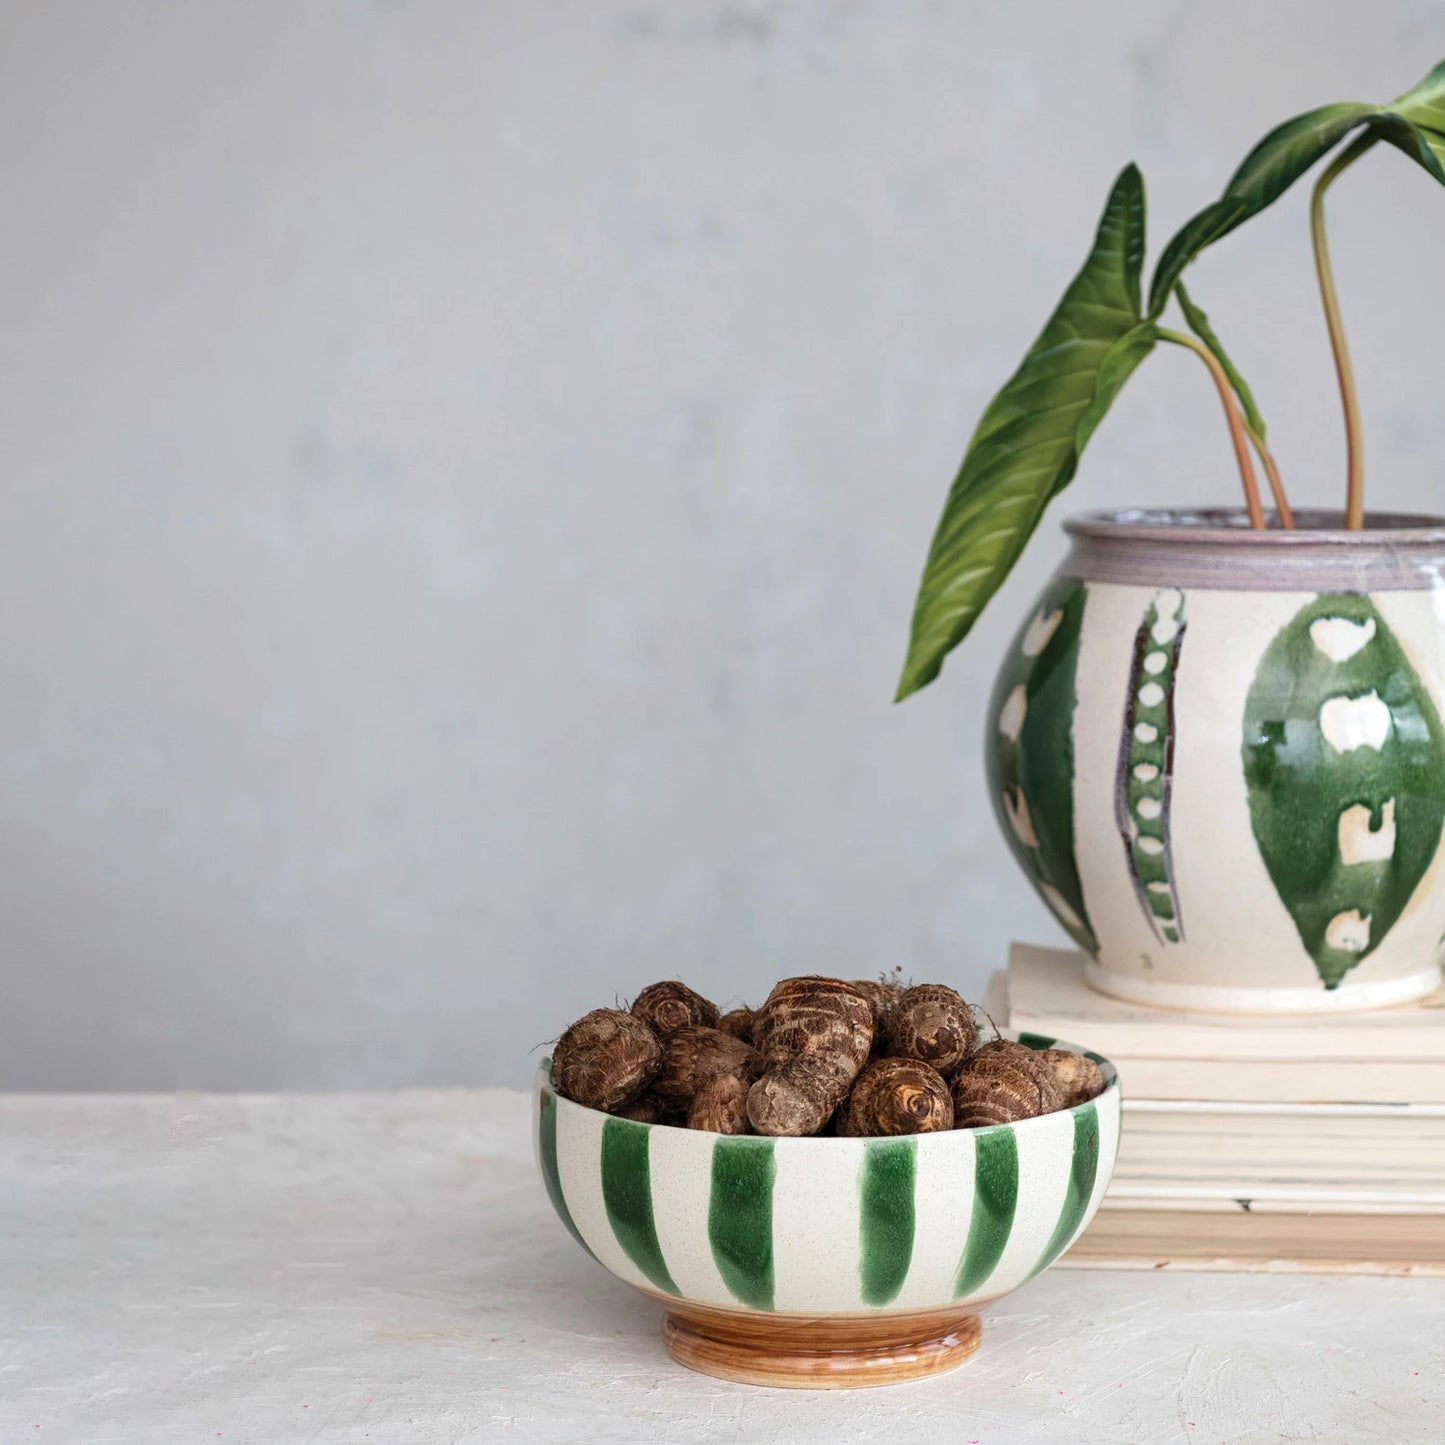 cream bowl with green stripes filled with tubers set on a table next to a plant.